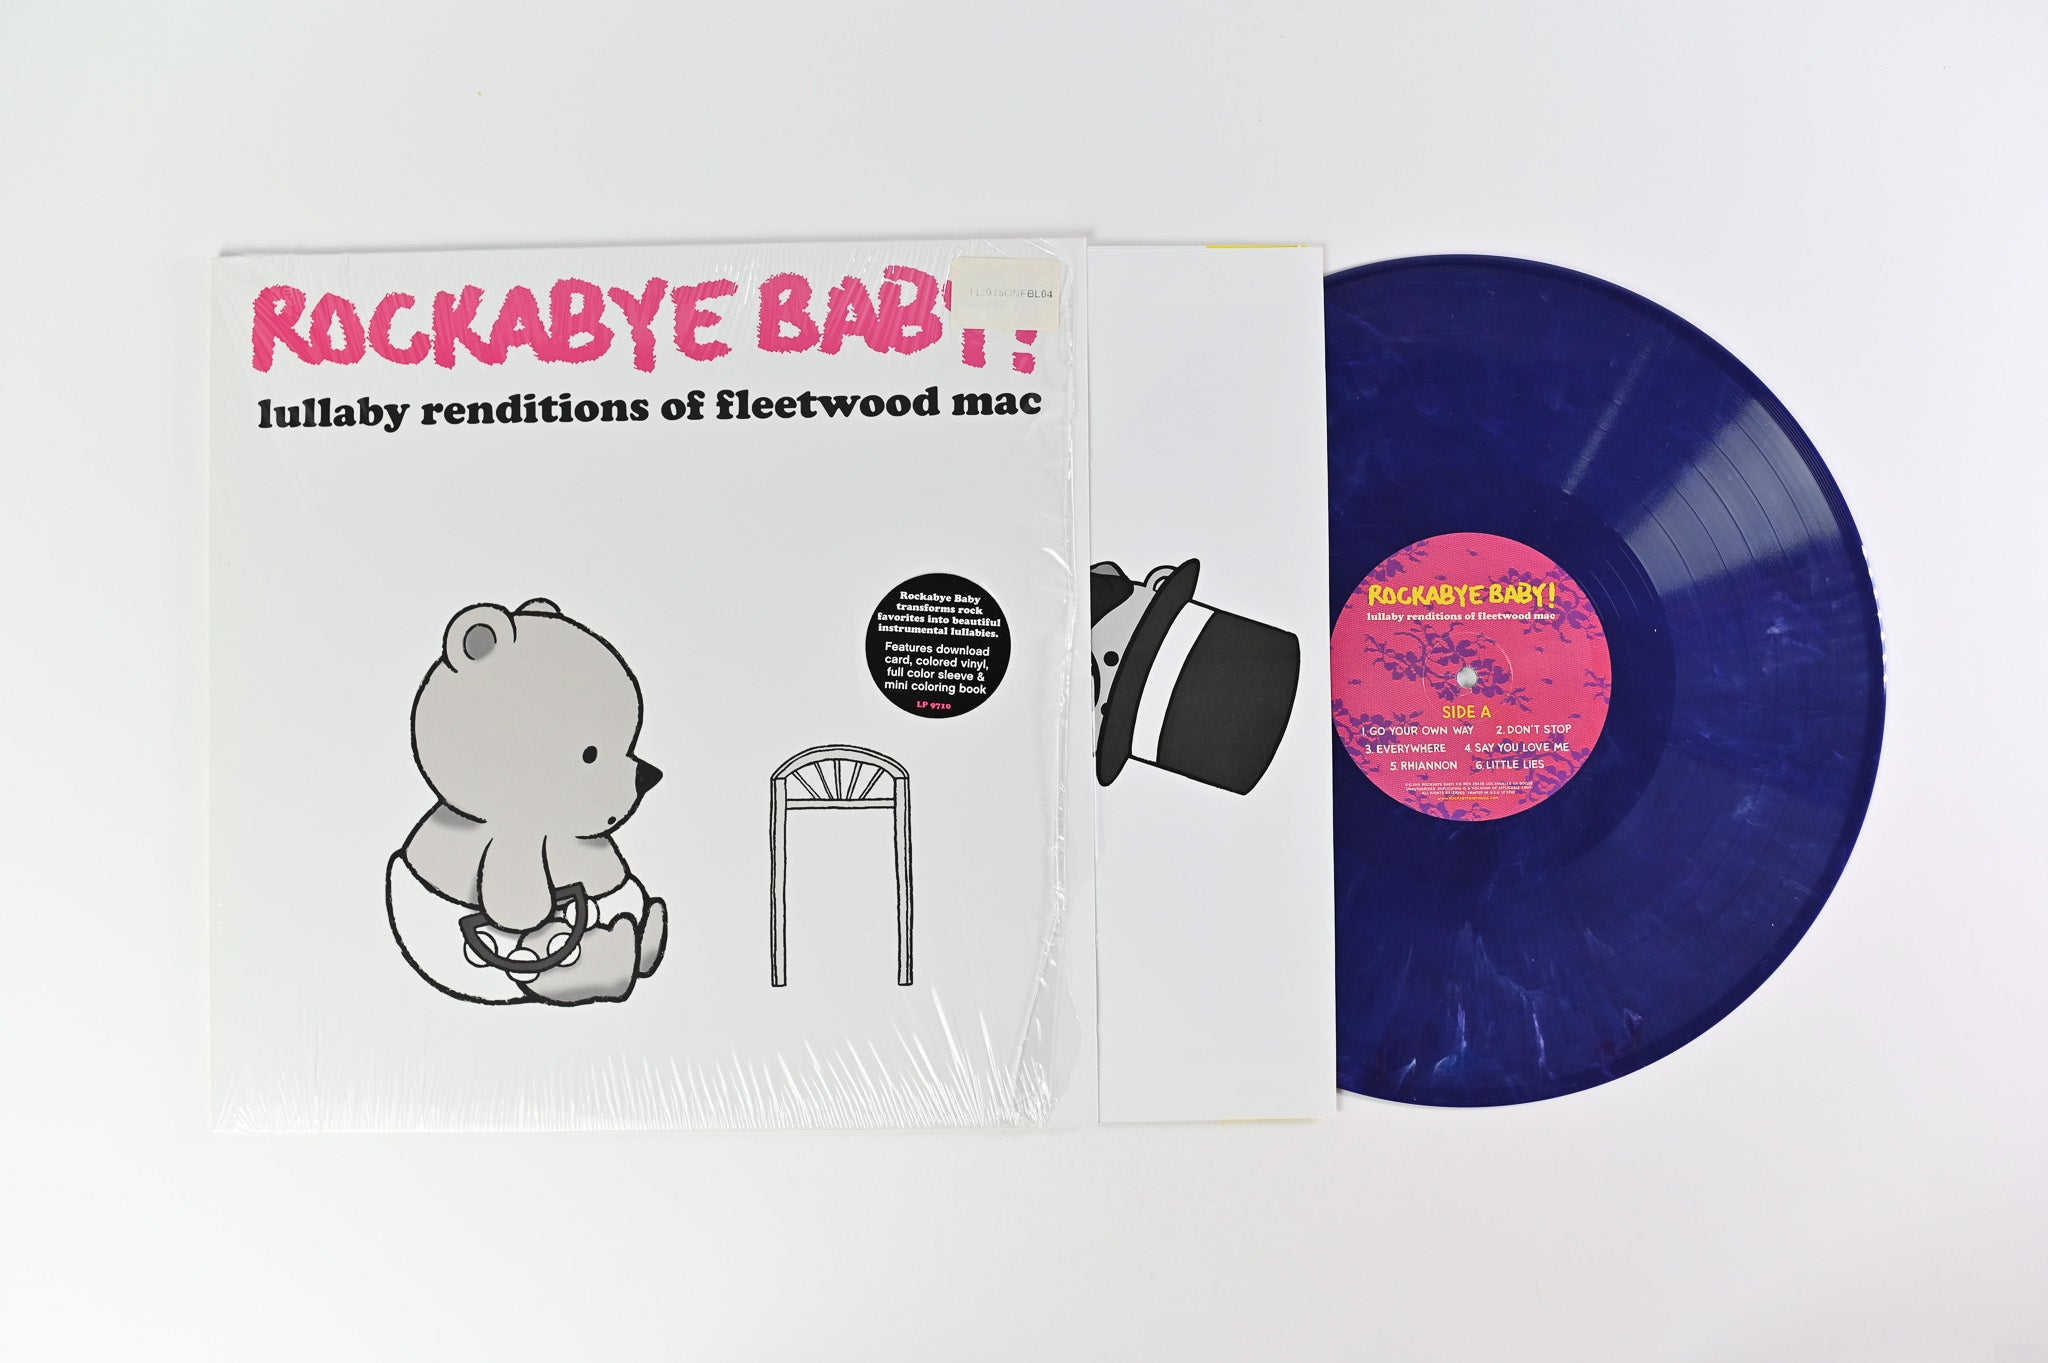 Andrew Bissell - Rockabye Baby! Lullaby Renditions Of Fleetwood Mac Ltd RSD Black Friday 2015 Blue Marbled